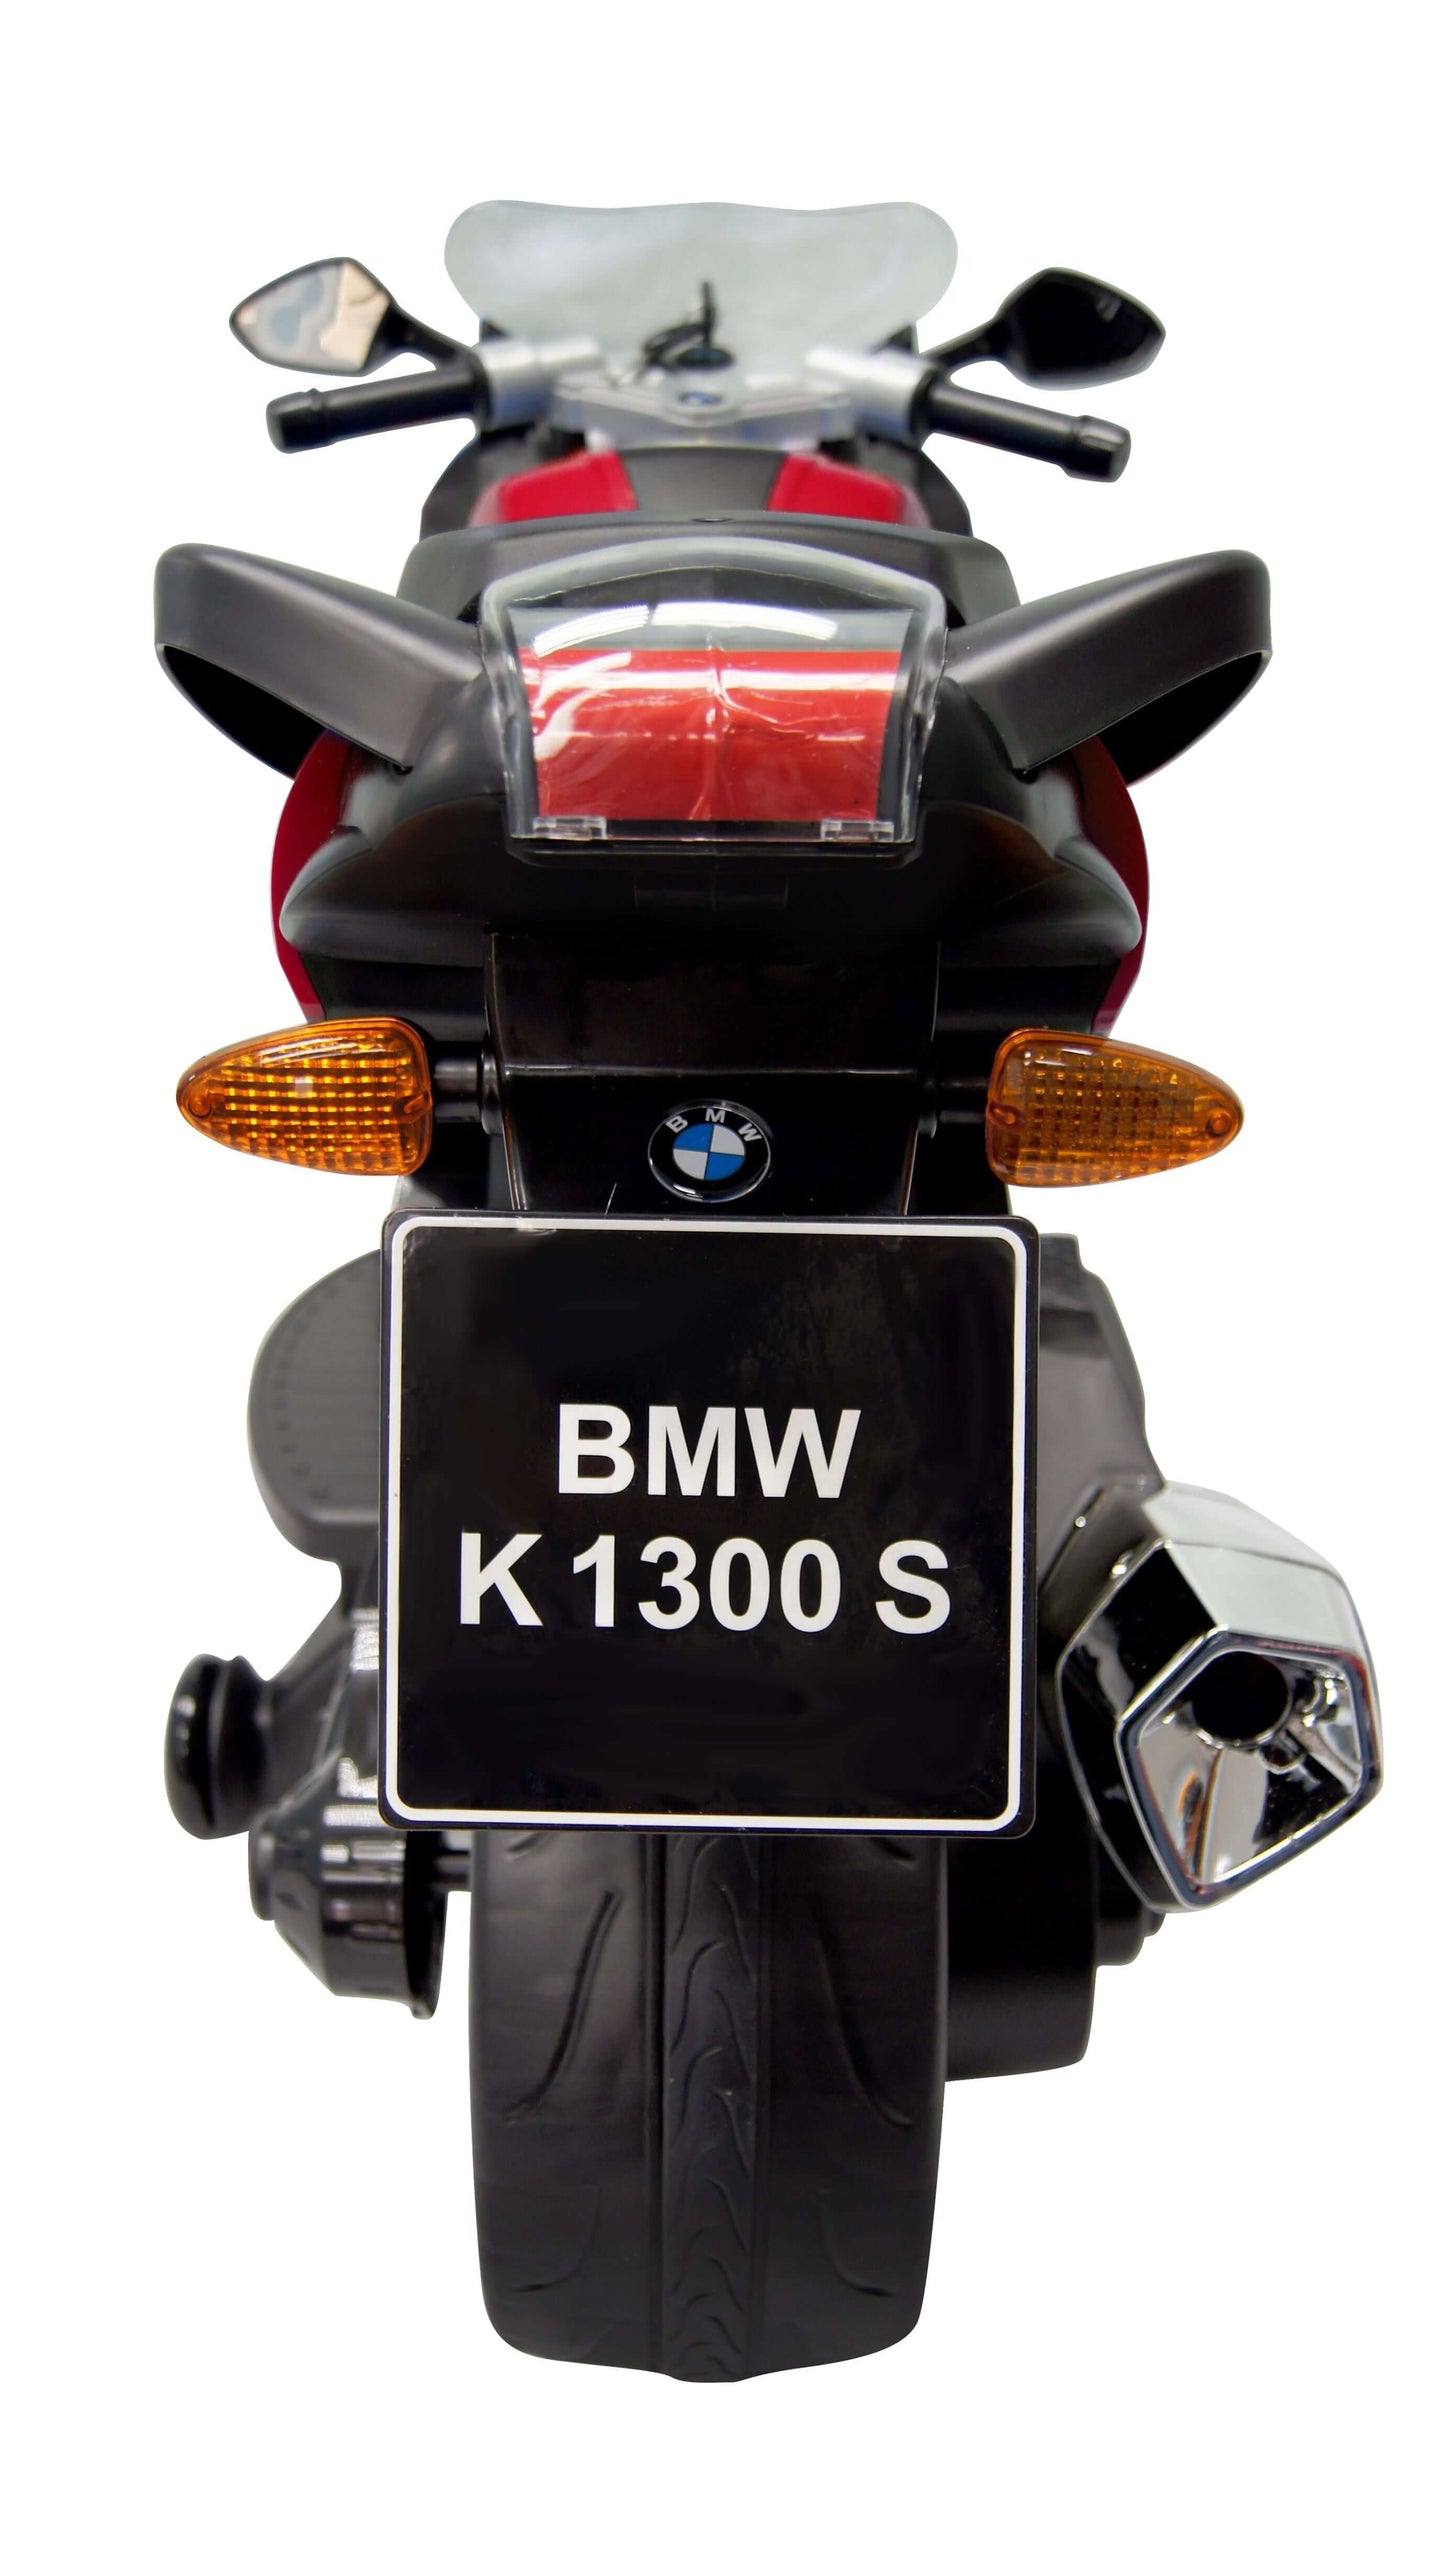 BMW Ride On Motorcycle 12V - Red